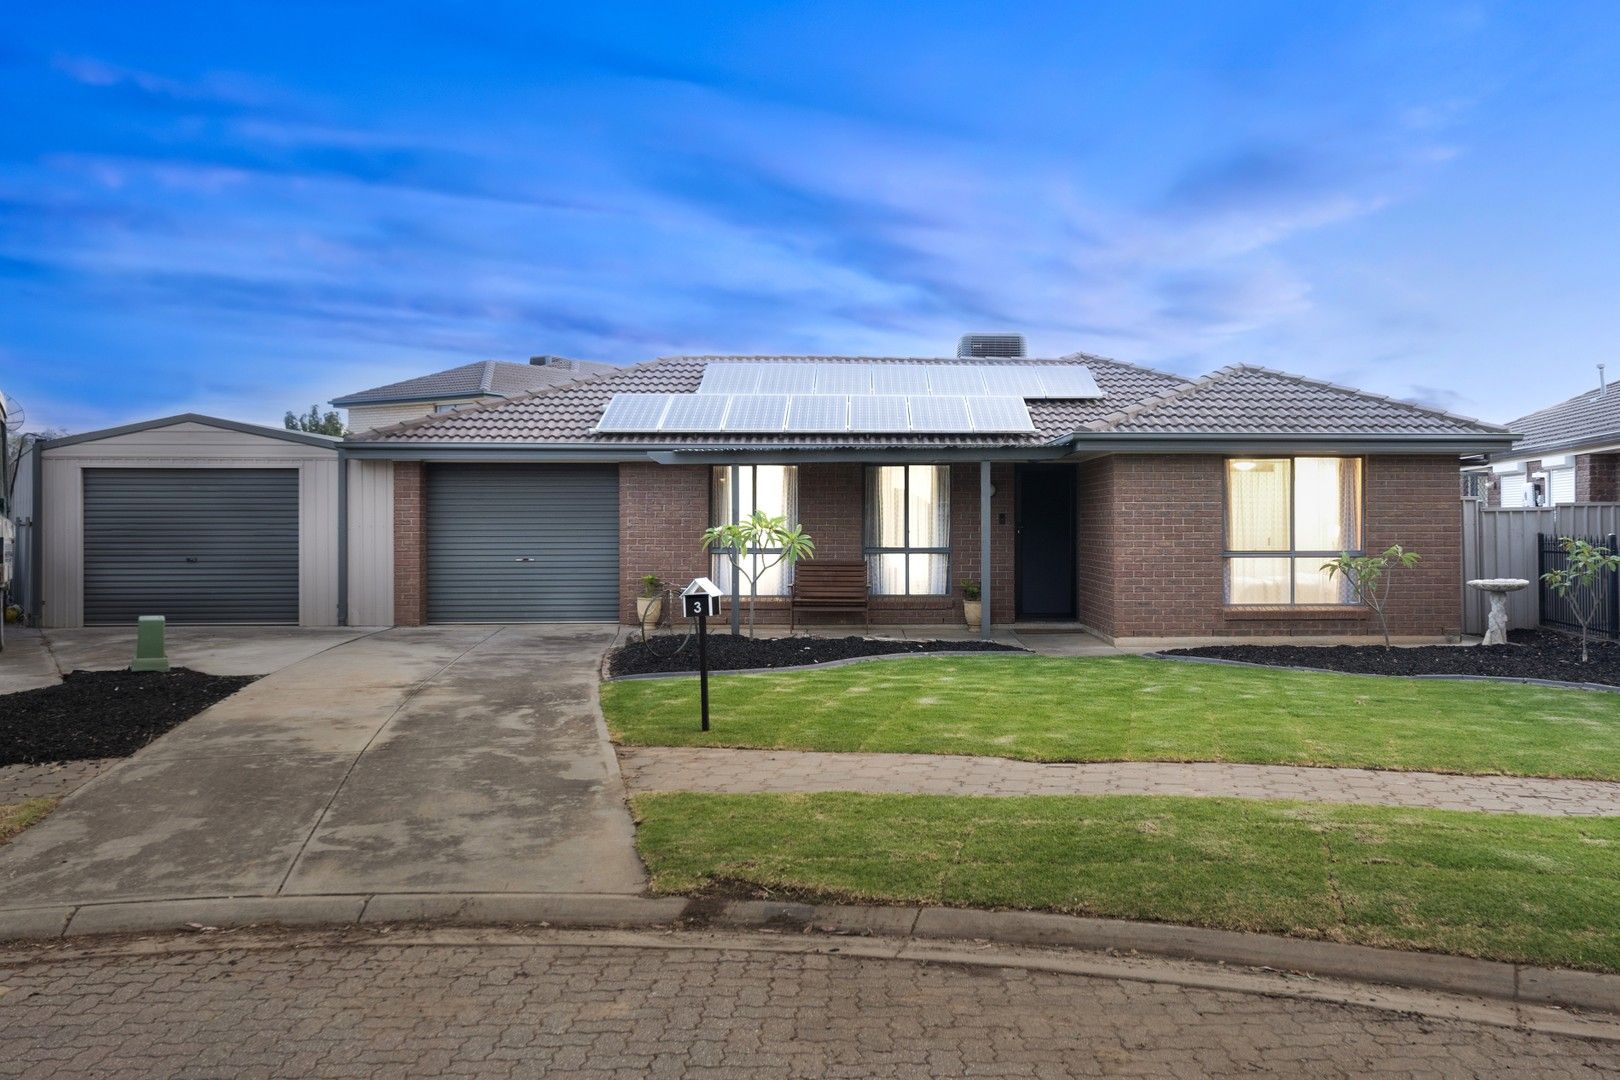 3 bedrooms House in 3 Crown Crescent PARALOWIE SA, 5108